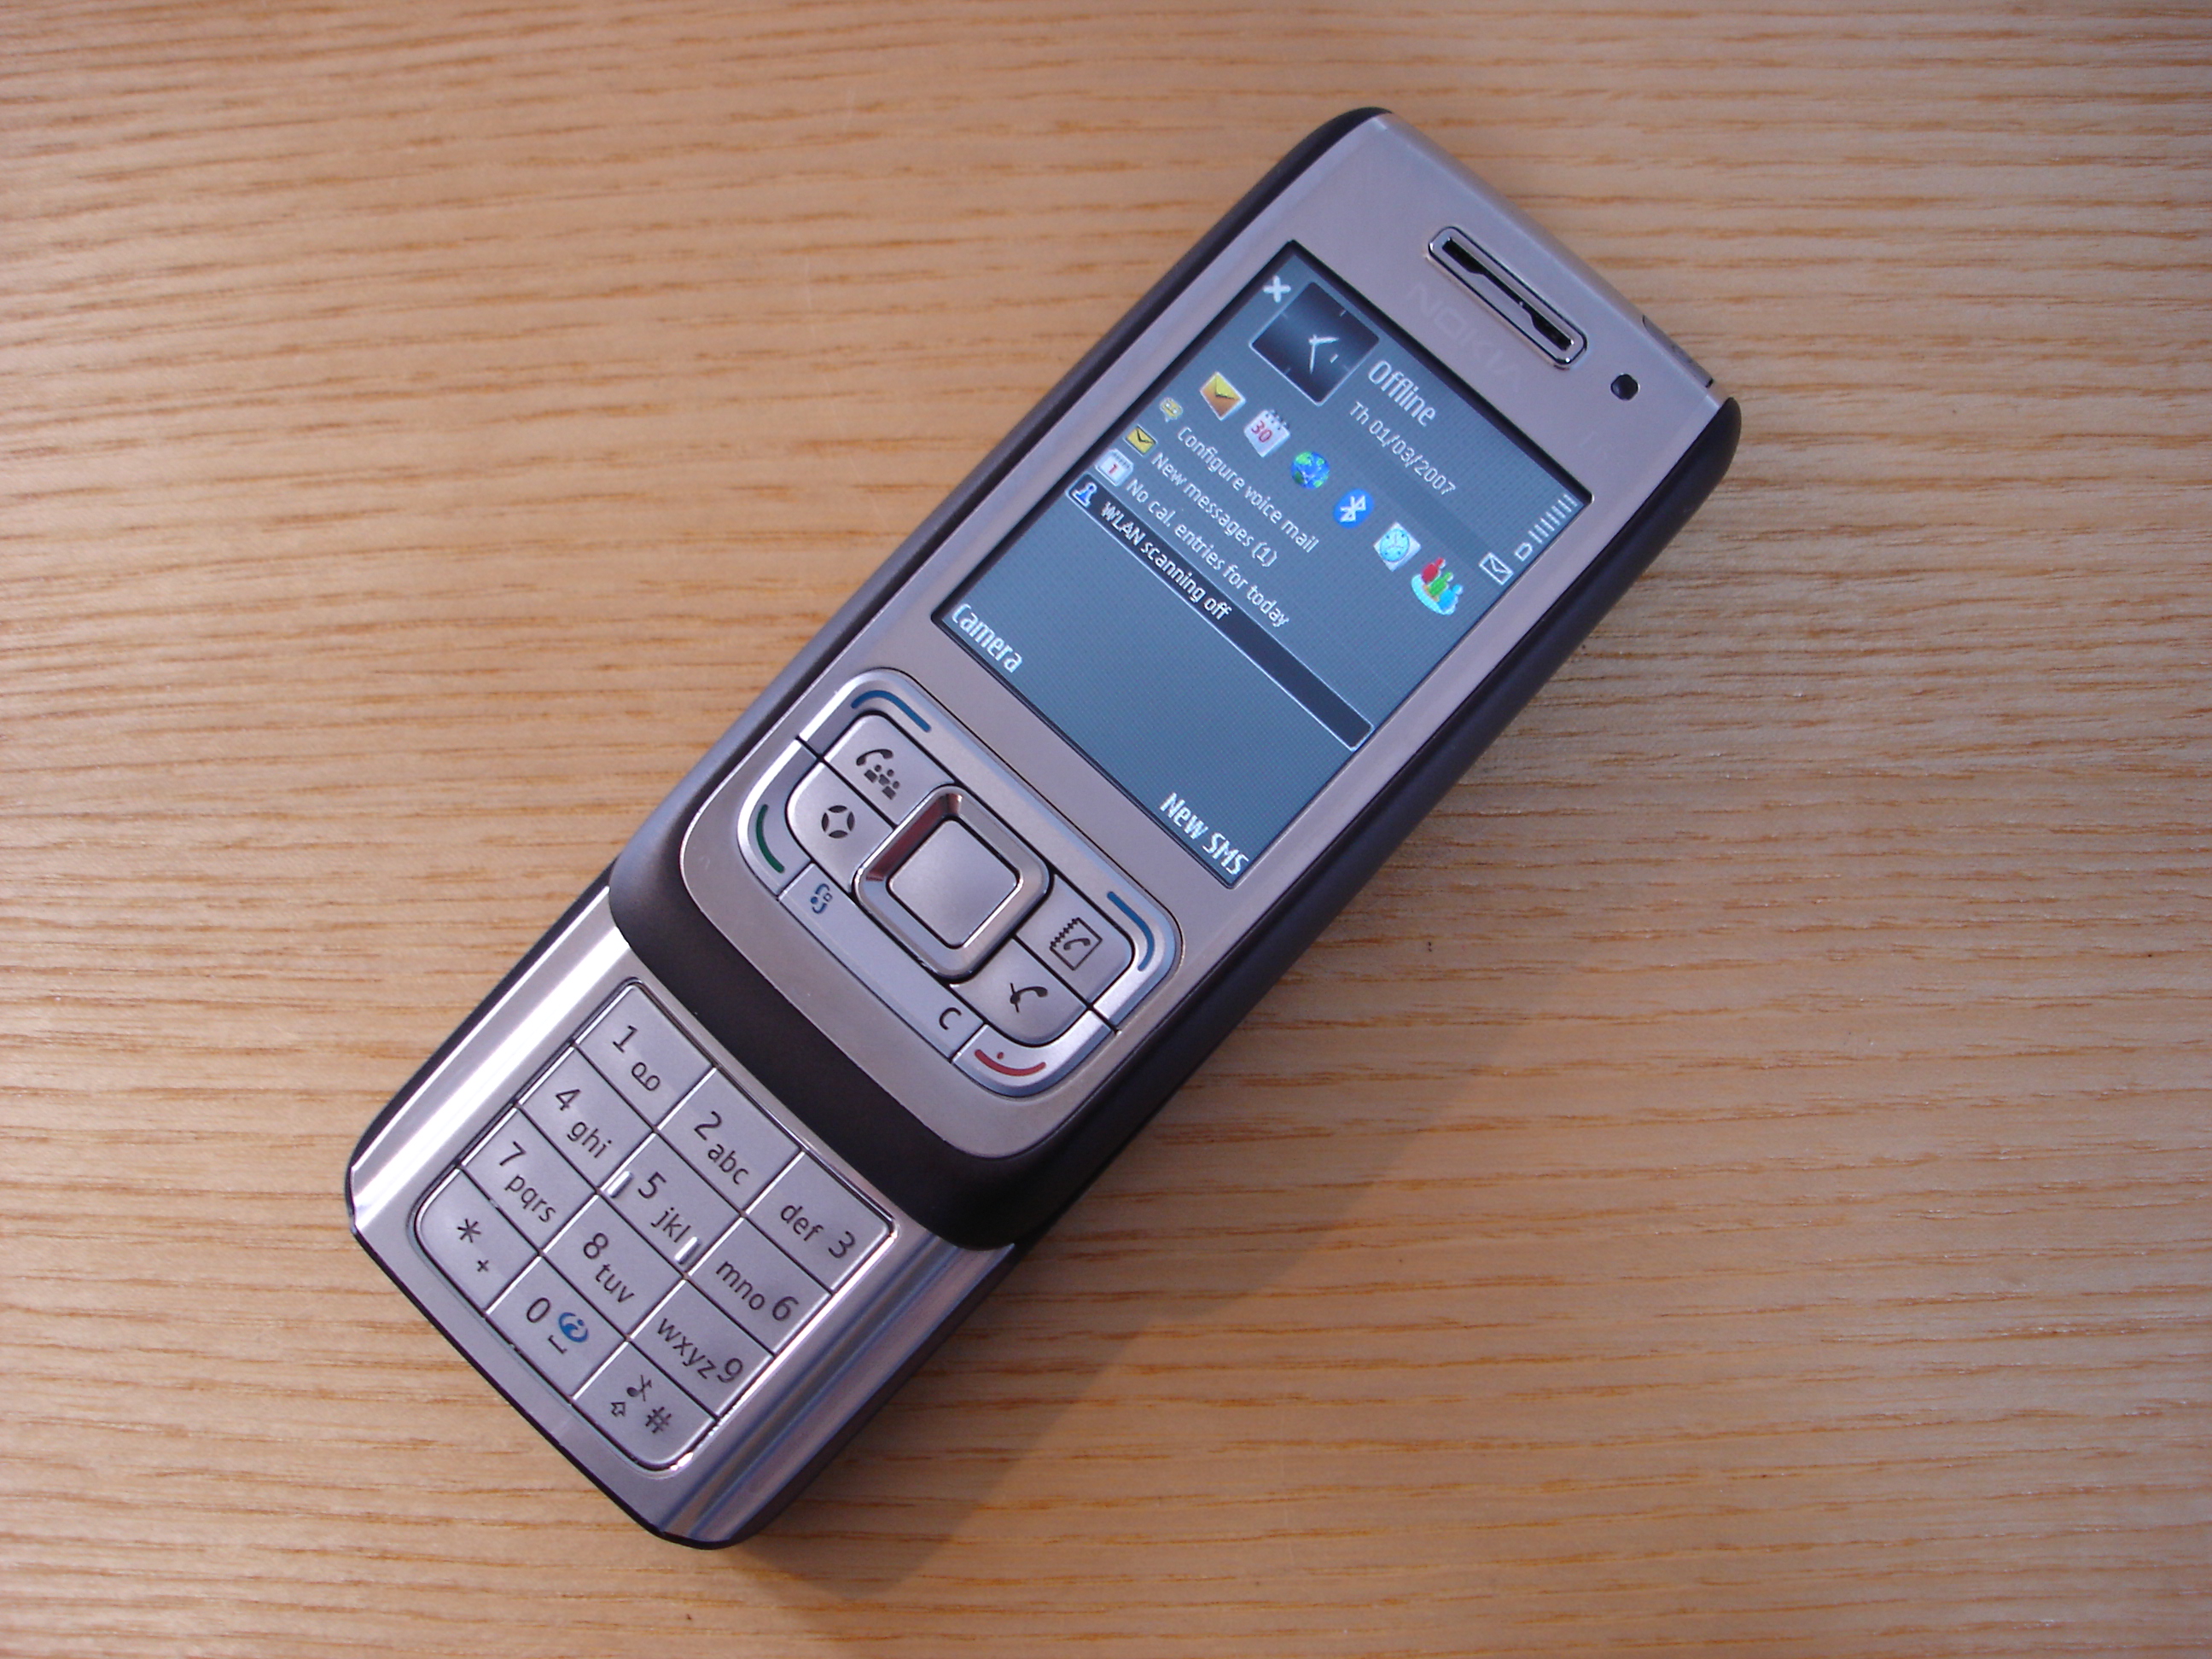 Nokia E65 review   All About Symbian